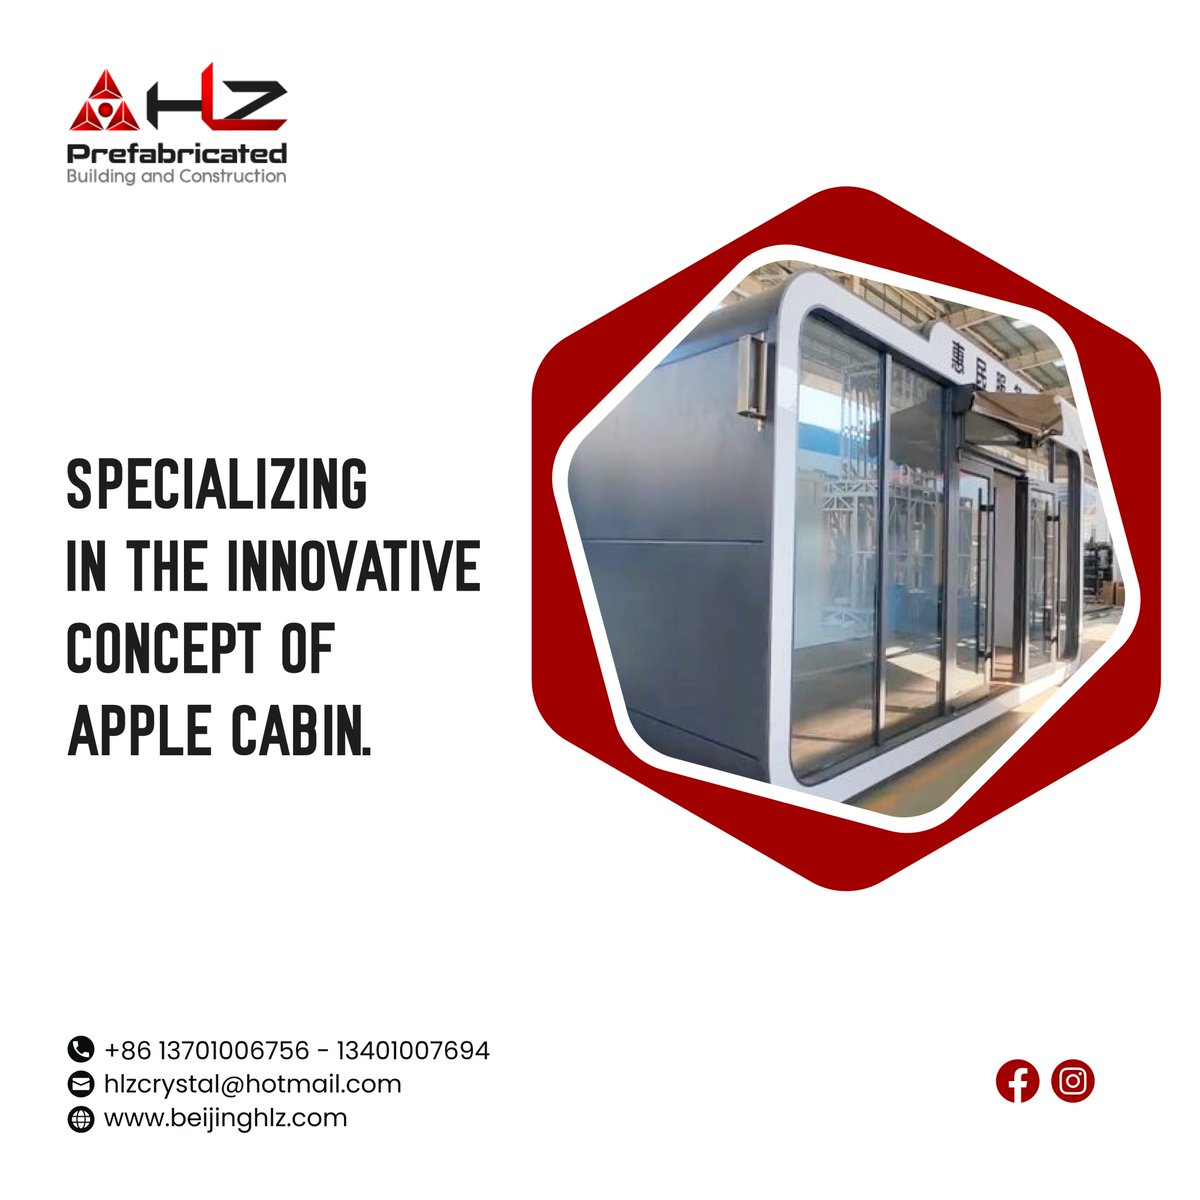 APPLE CABIN features a blend of modern design and functionality, providing a versatile and efficient living space.

#steelstructure #construction #constructionlife #constructiontechnology #steelconstruction #movablehouse #prefabricated #prefabricatedhome